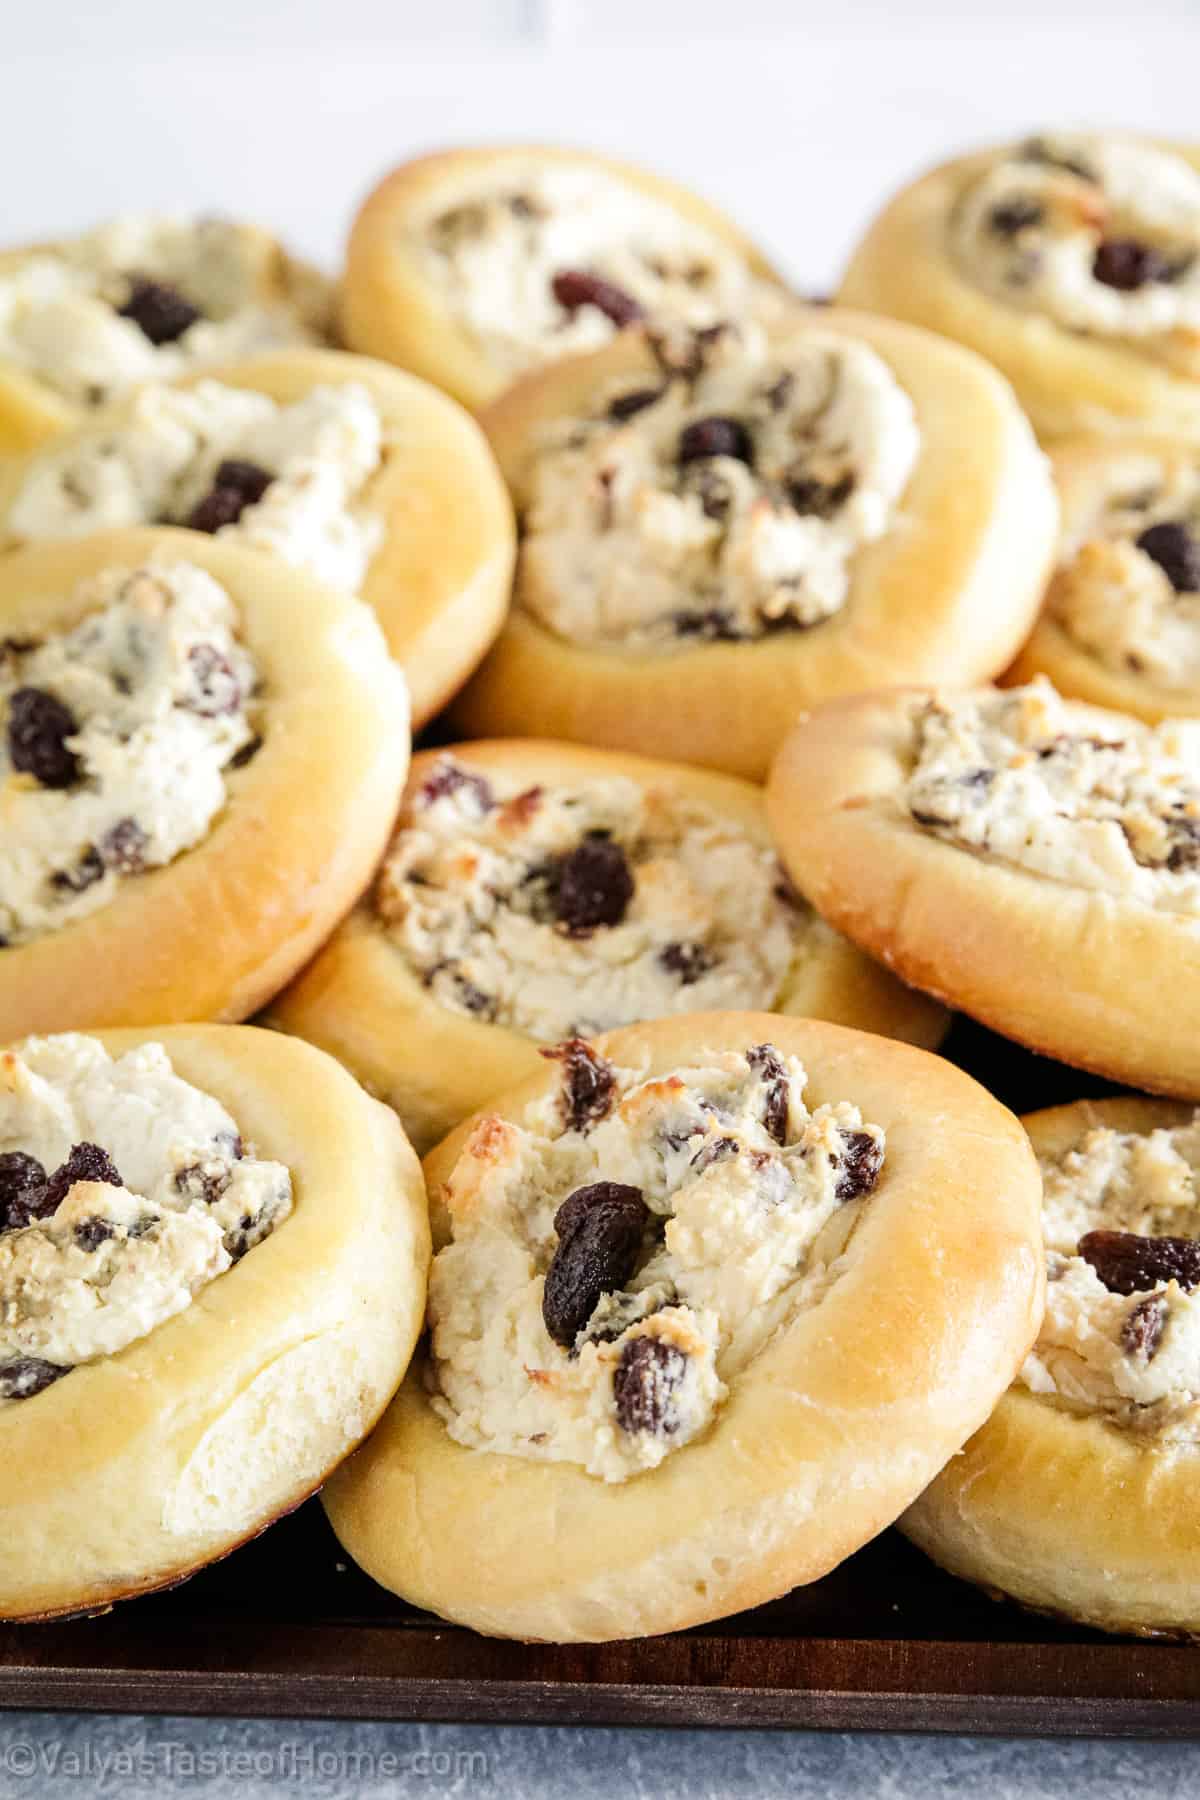 Sweet buns are a type of pastry made with slightly sweet yeast dough and filled with farmer's cheese and raisins. 